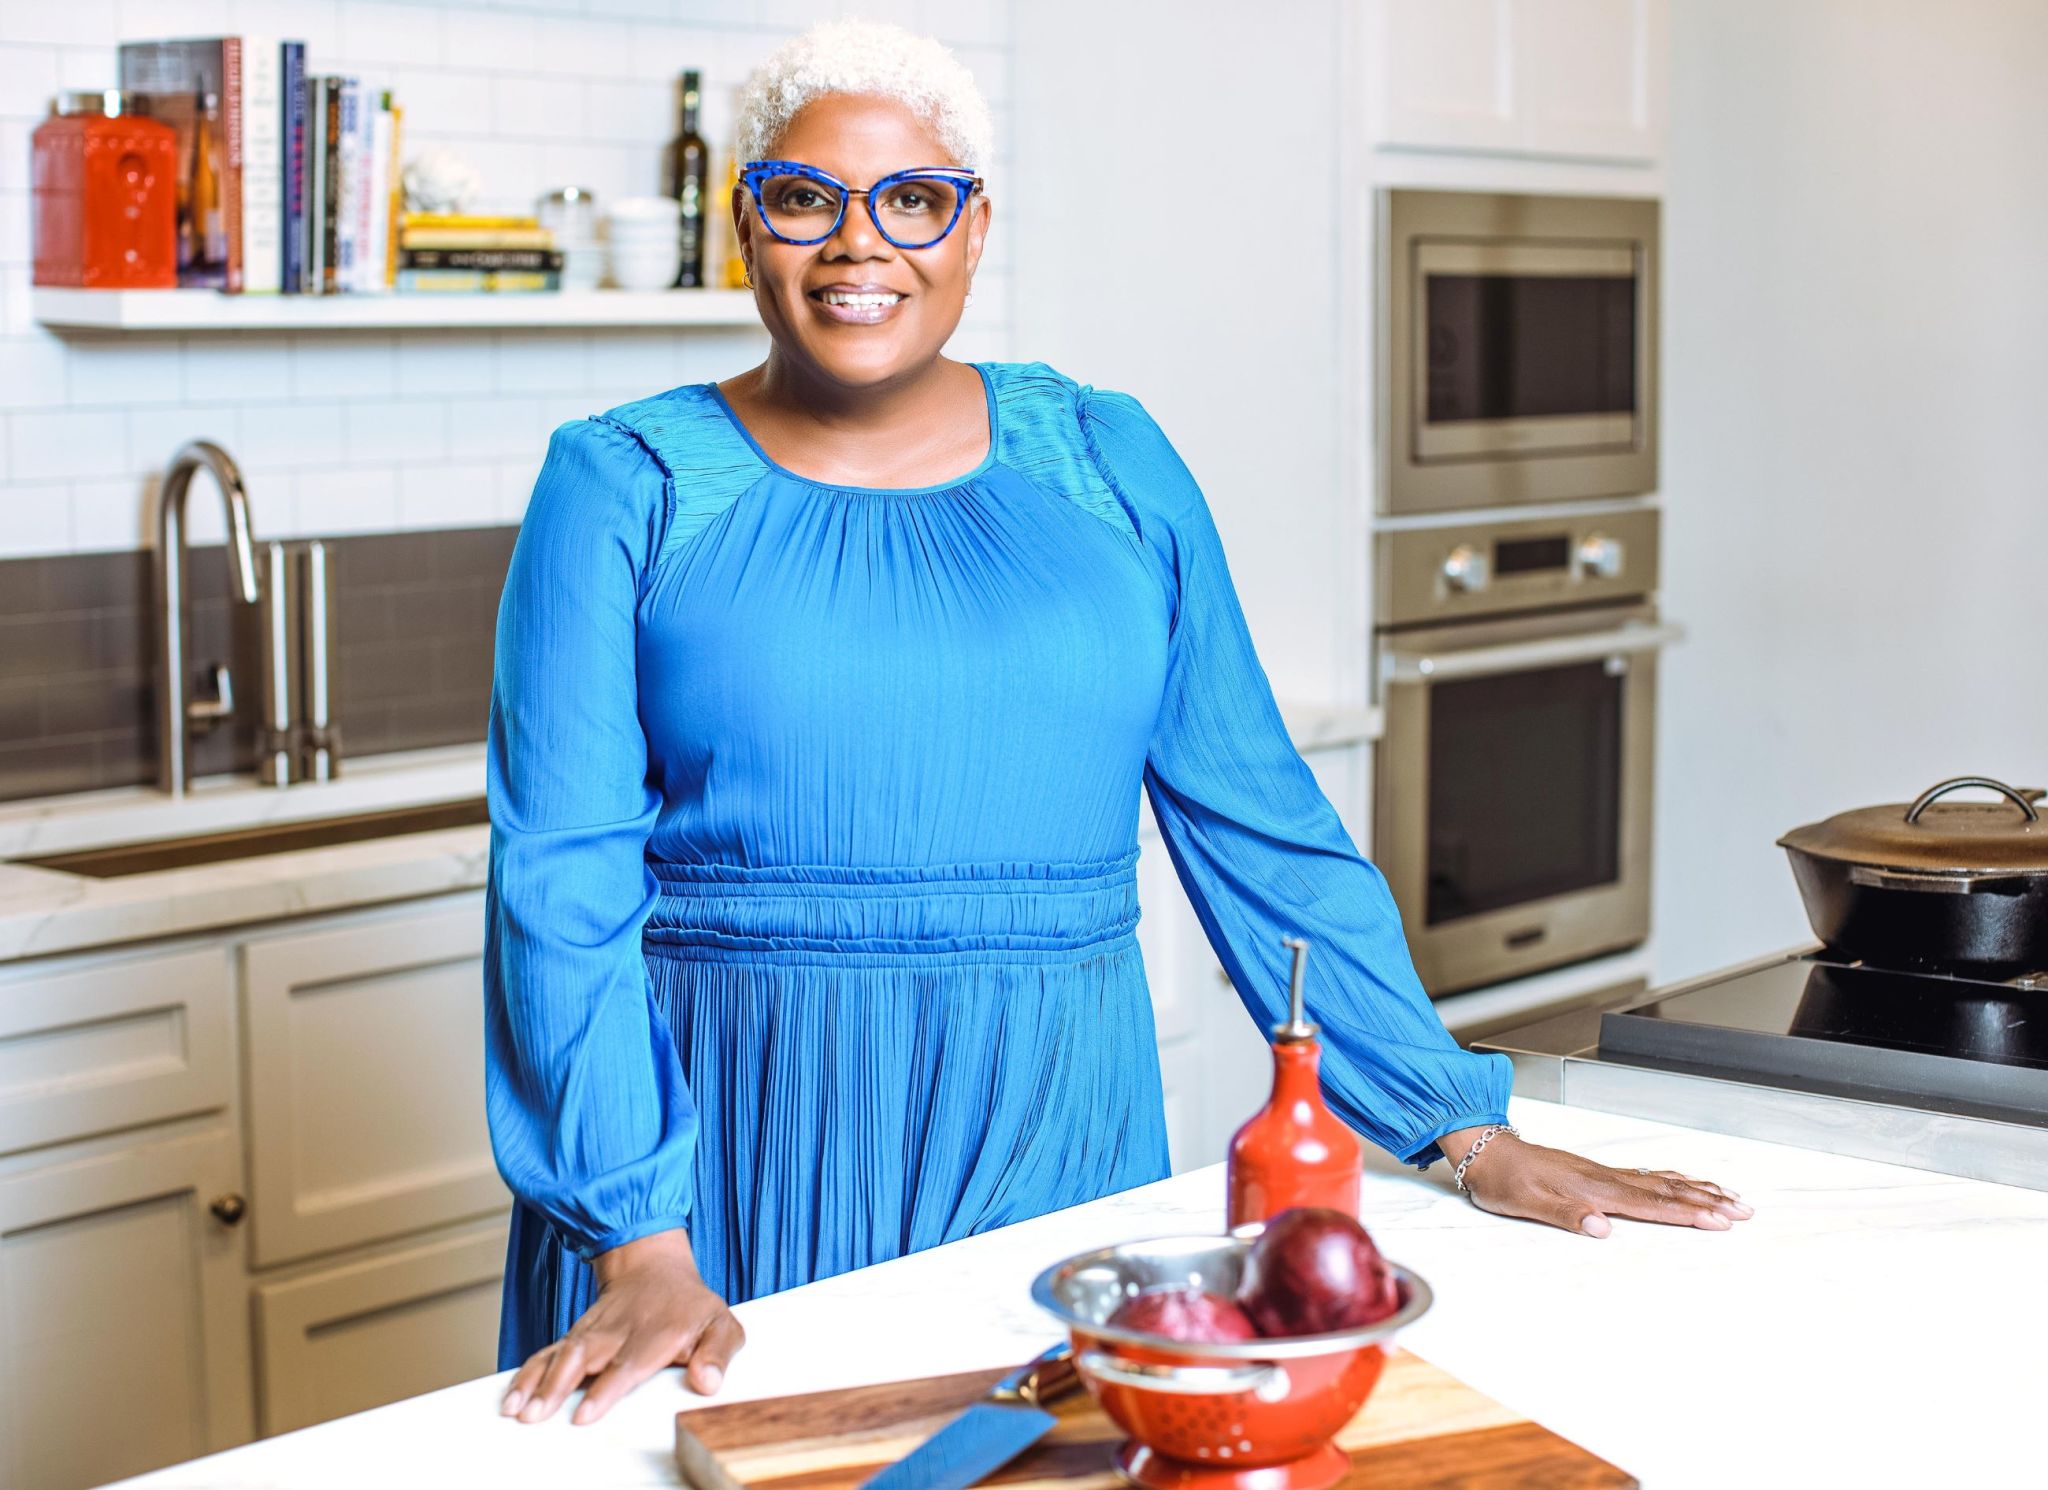 The brains behind Twisted Soul Cookhouse & Pours is Deborah VanTrece, cookbook author and award-winning chef